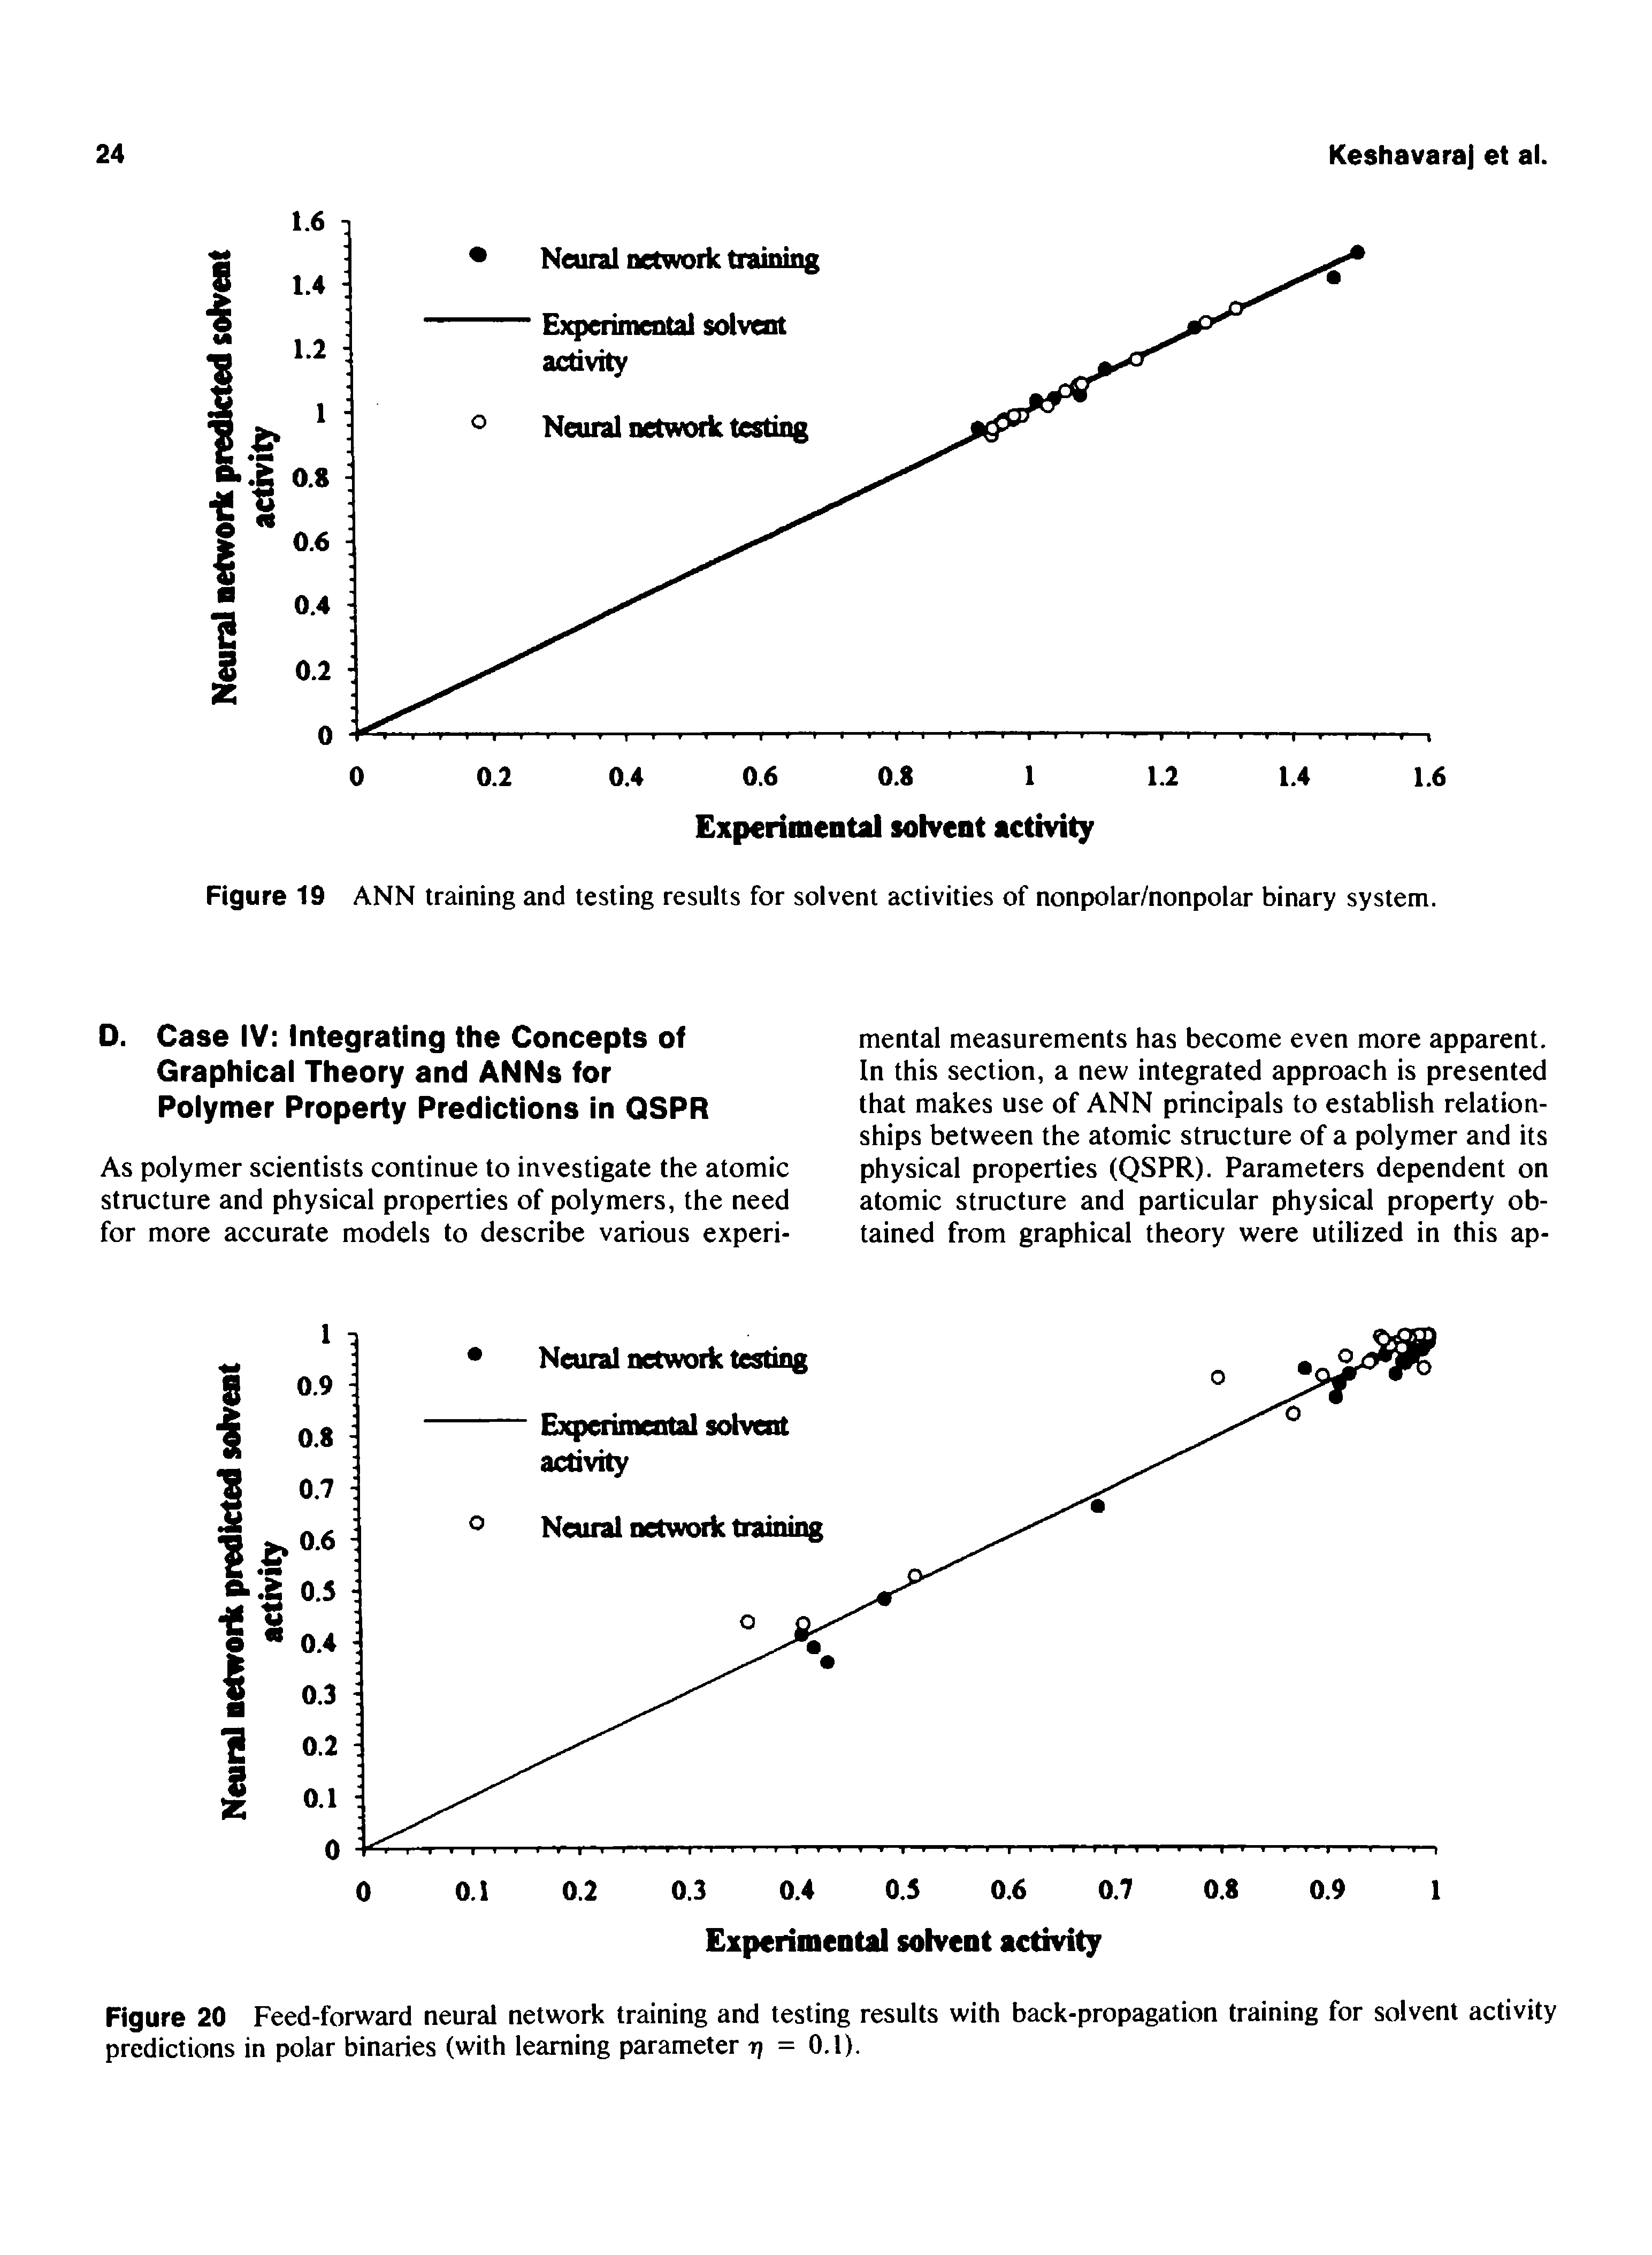 Figure 20 Feed-forward neural network training and testing results with back-propagation training for solvent activity predictions in polar binaries (with learning parameter rj = O.l).